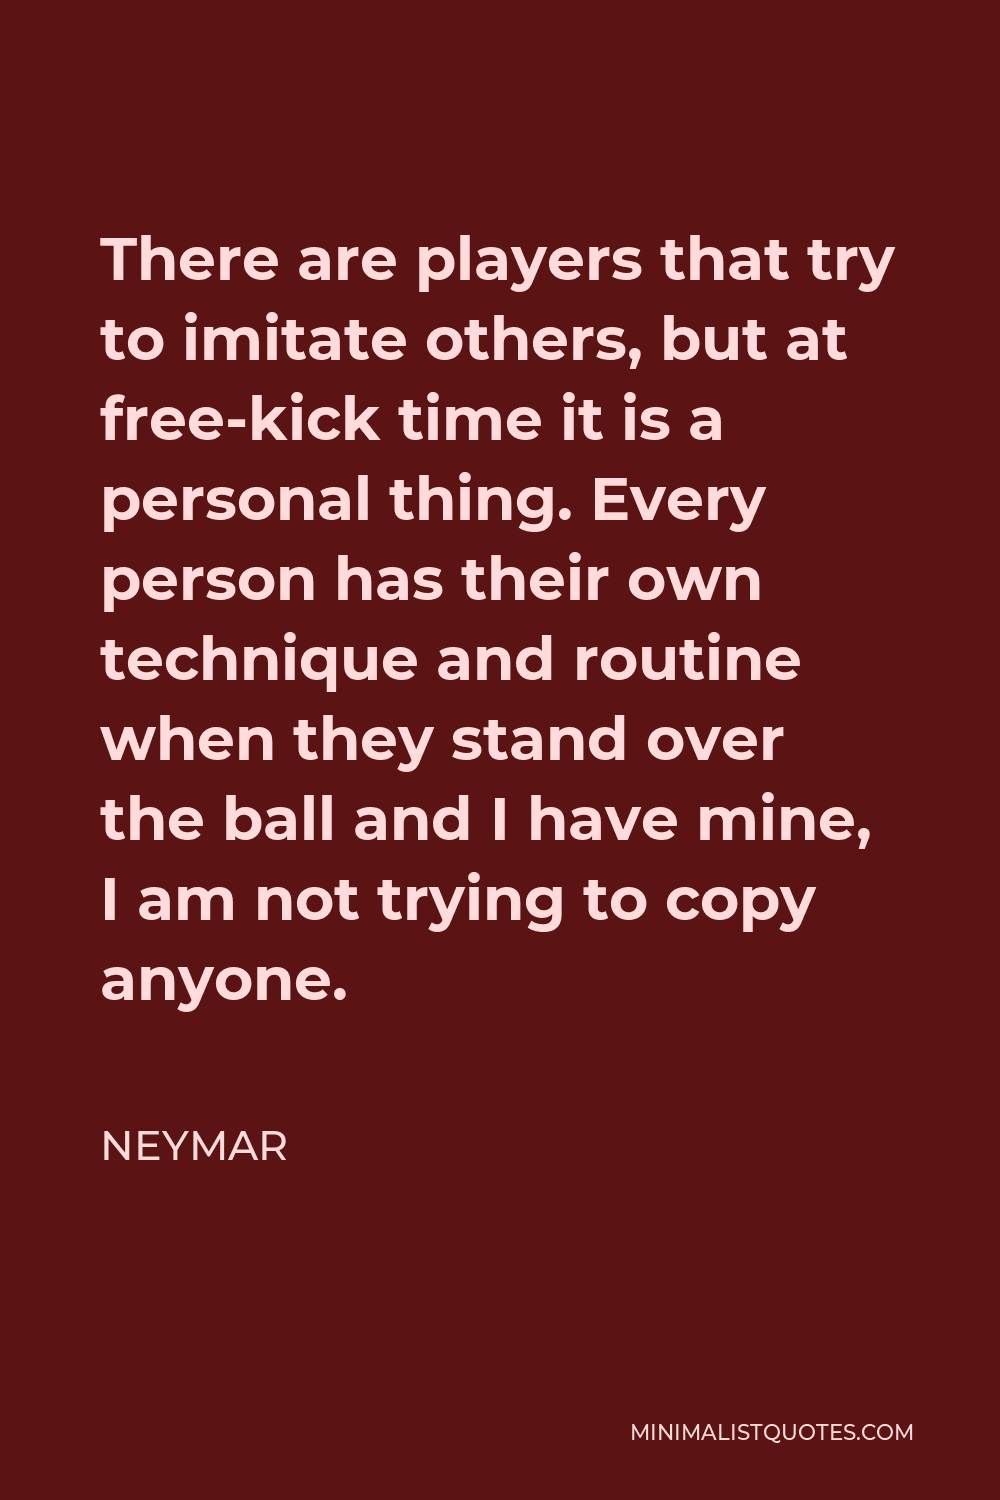 Neymar Quote - There are players that try to imitate others, but at free-kick time it is a personal thing. Every person has their own technique and routine when they stand over the ball and I have mine, I am not trying to copy anyone.